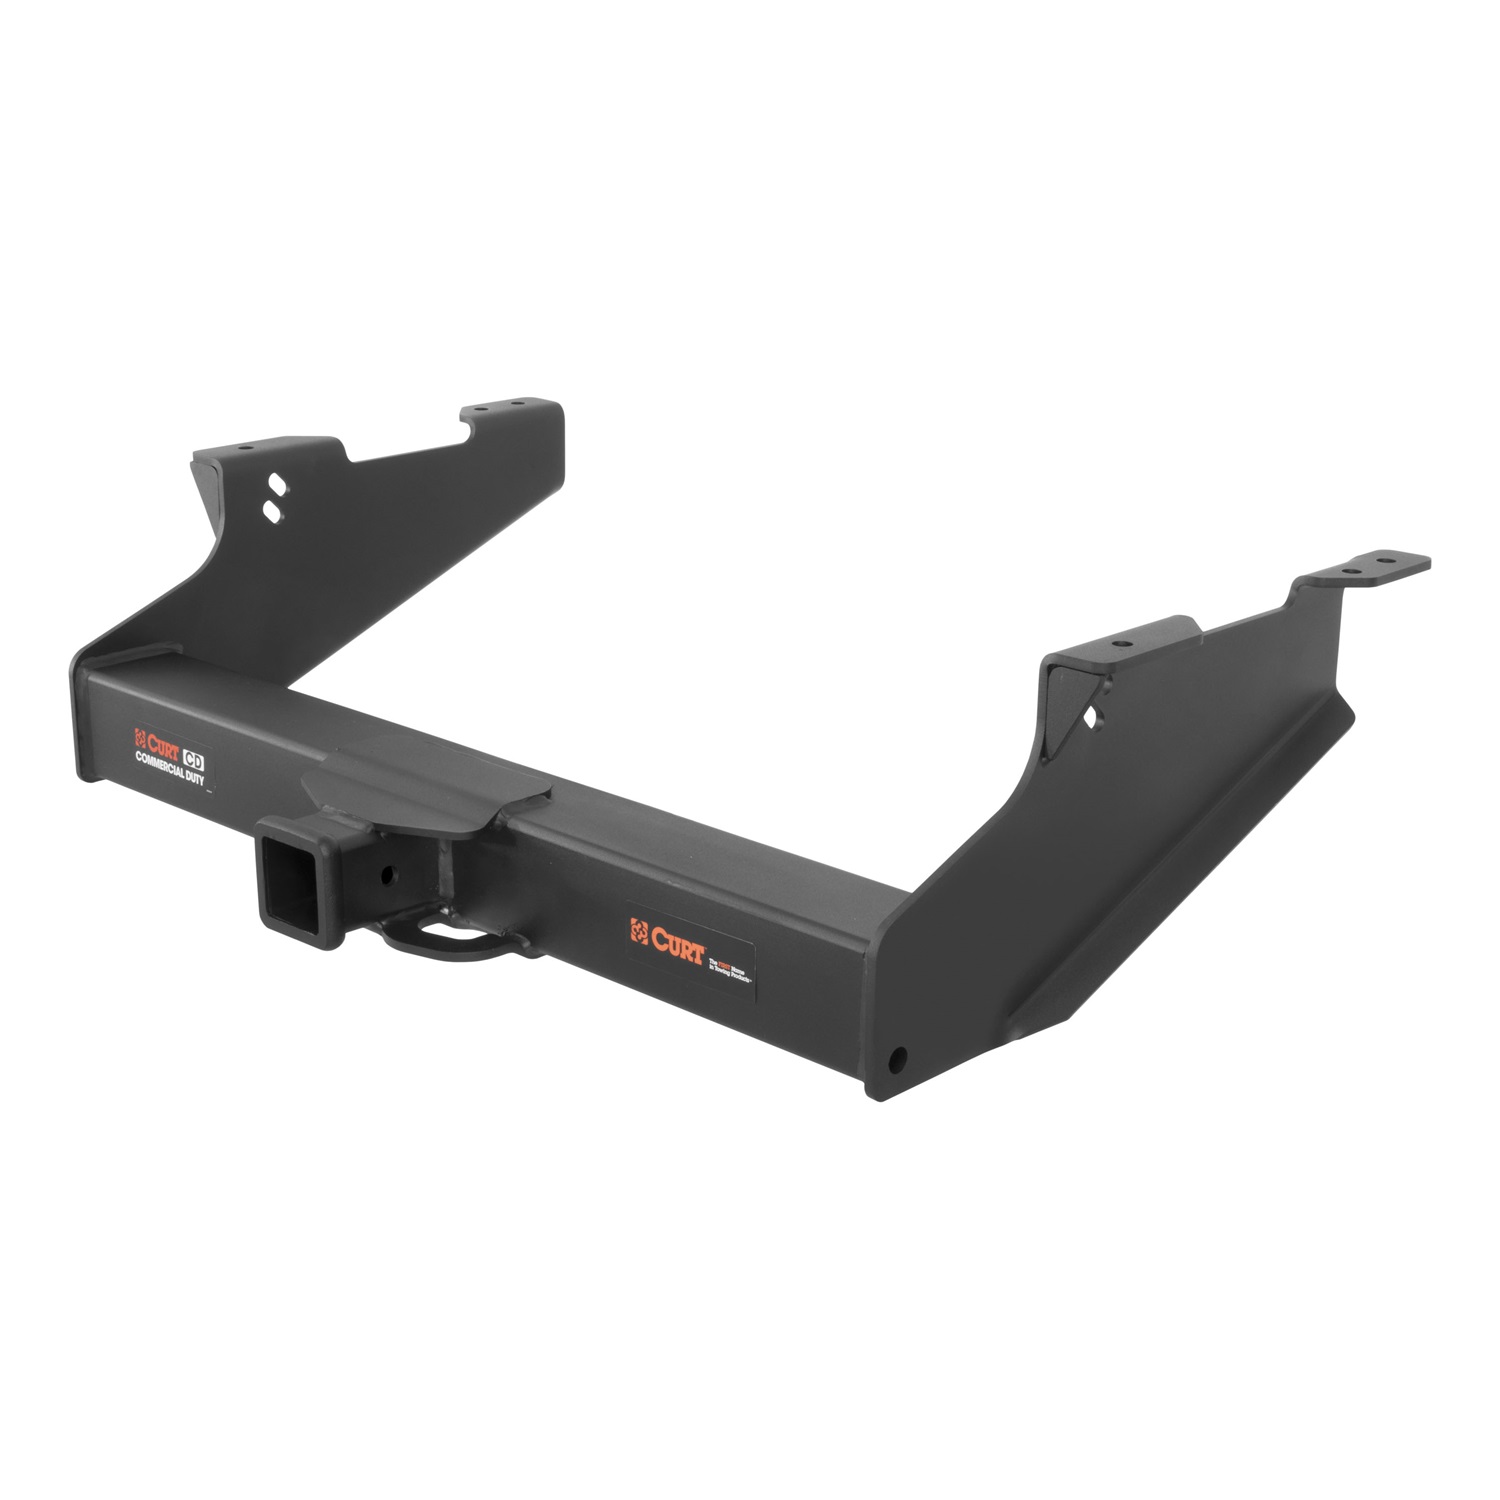 CURT Manufacturing CURT Manufacturing 15704 Class V; 2.5 in. Commercial Duty Hitch